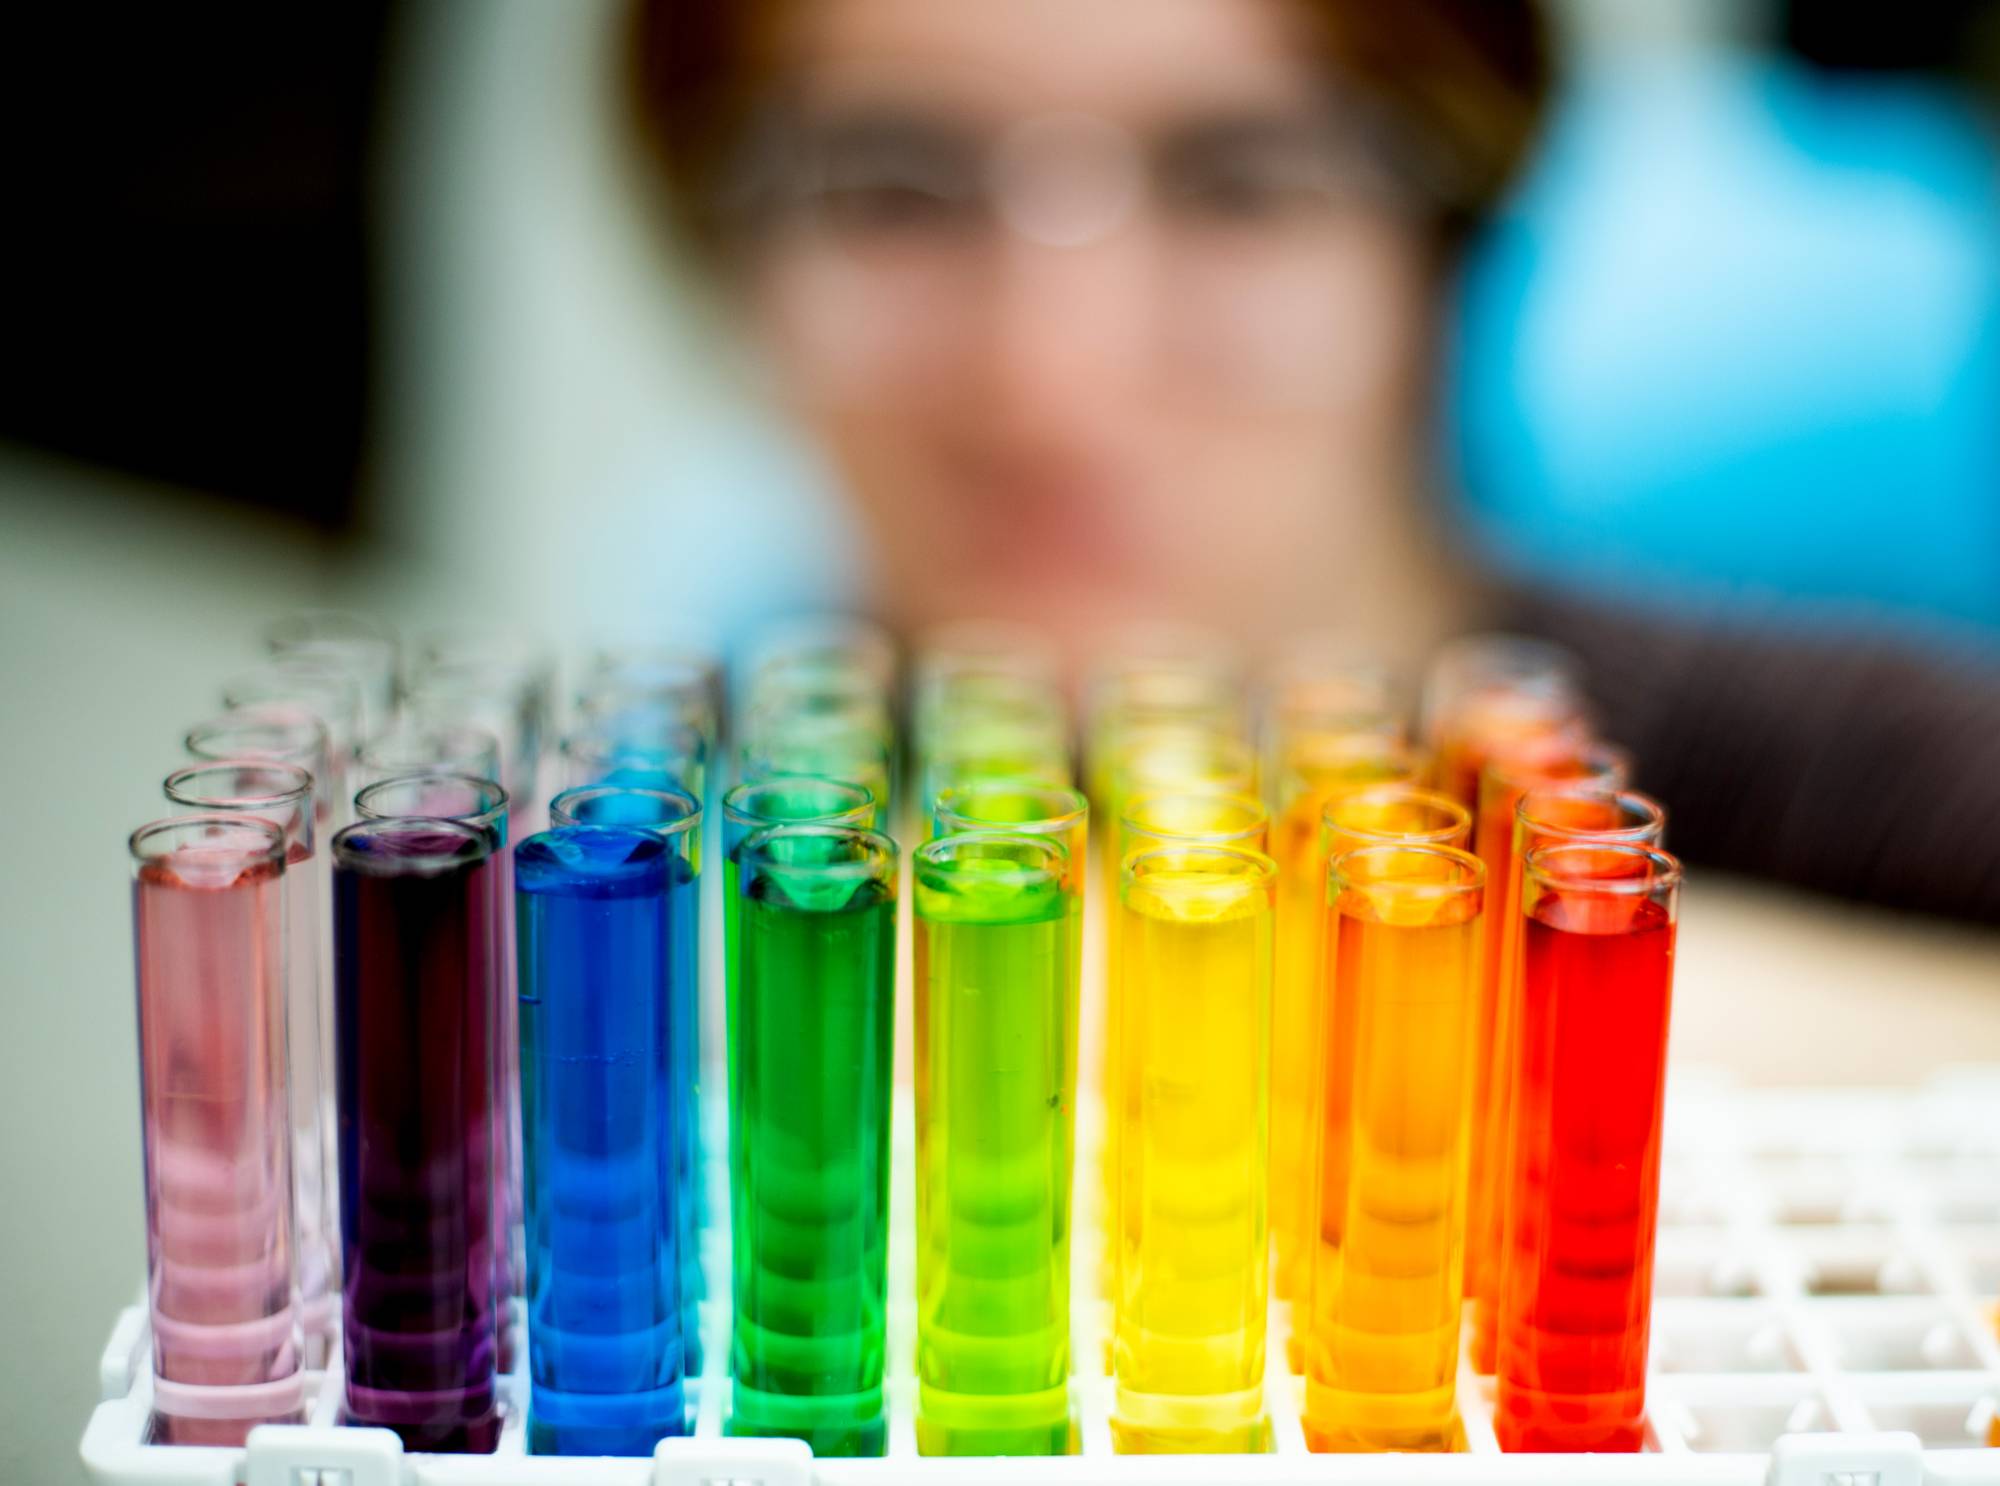 Chemistry tubes in rainbow colors